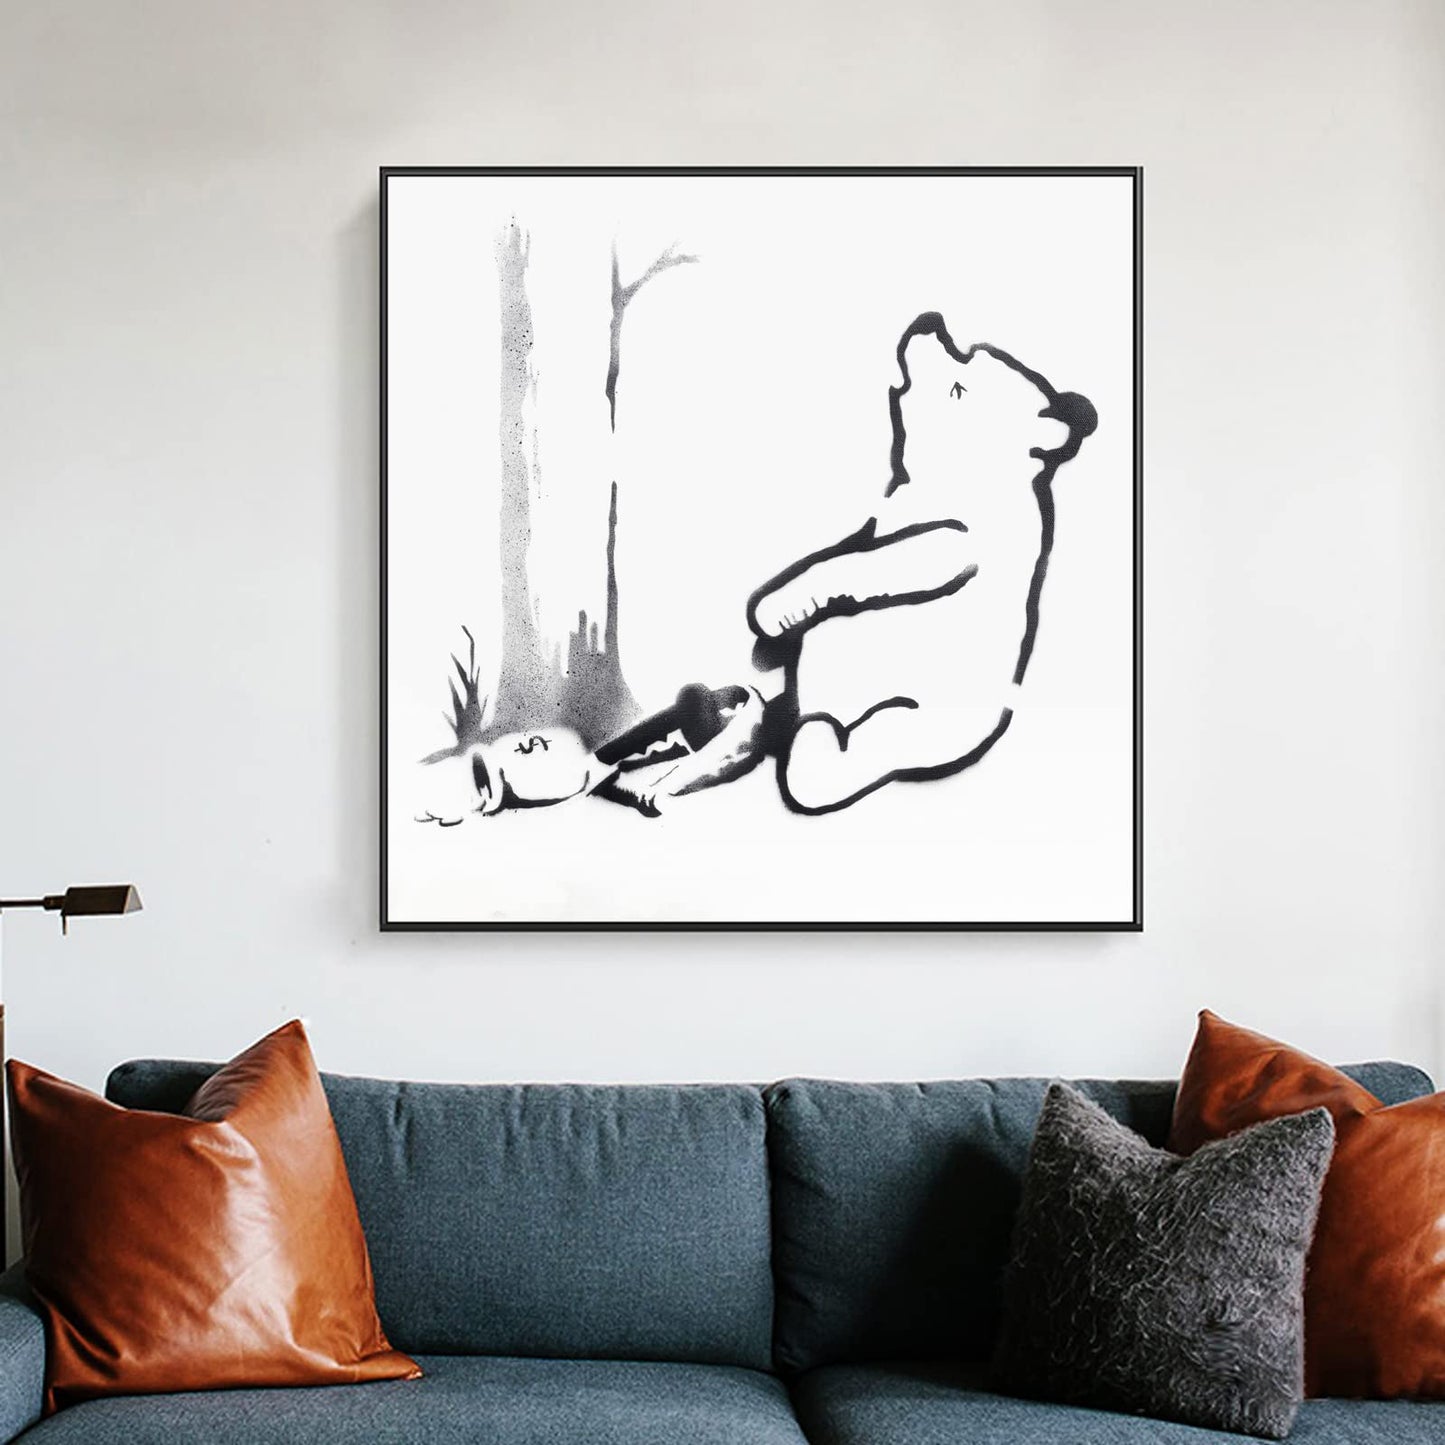 ZZPT Banksy Canvas Wall Art - Bear's Foot Caught In a Clip Print - Cute Bear Poster - Black and White Animal Pictures for Wall Decor Unframed (12x12in/30x30cm)